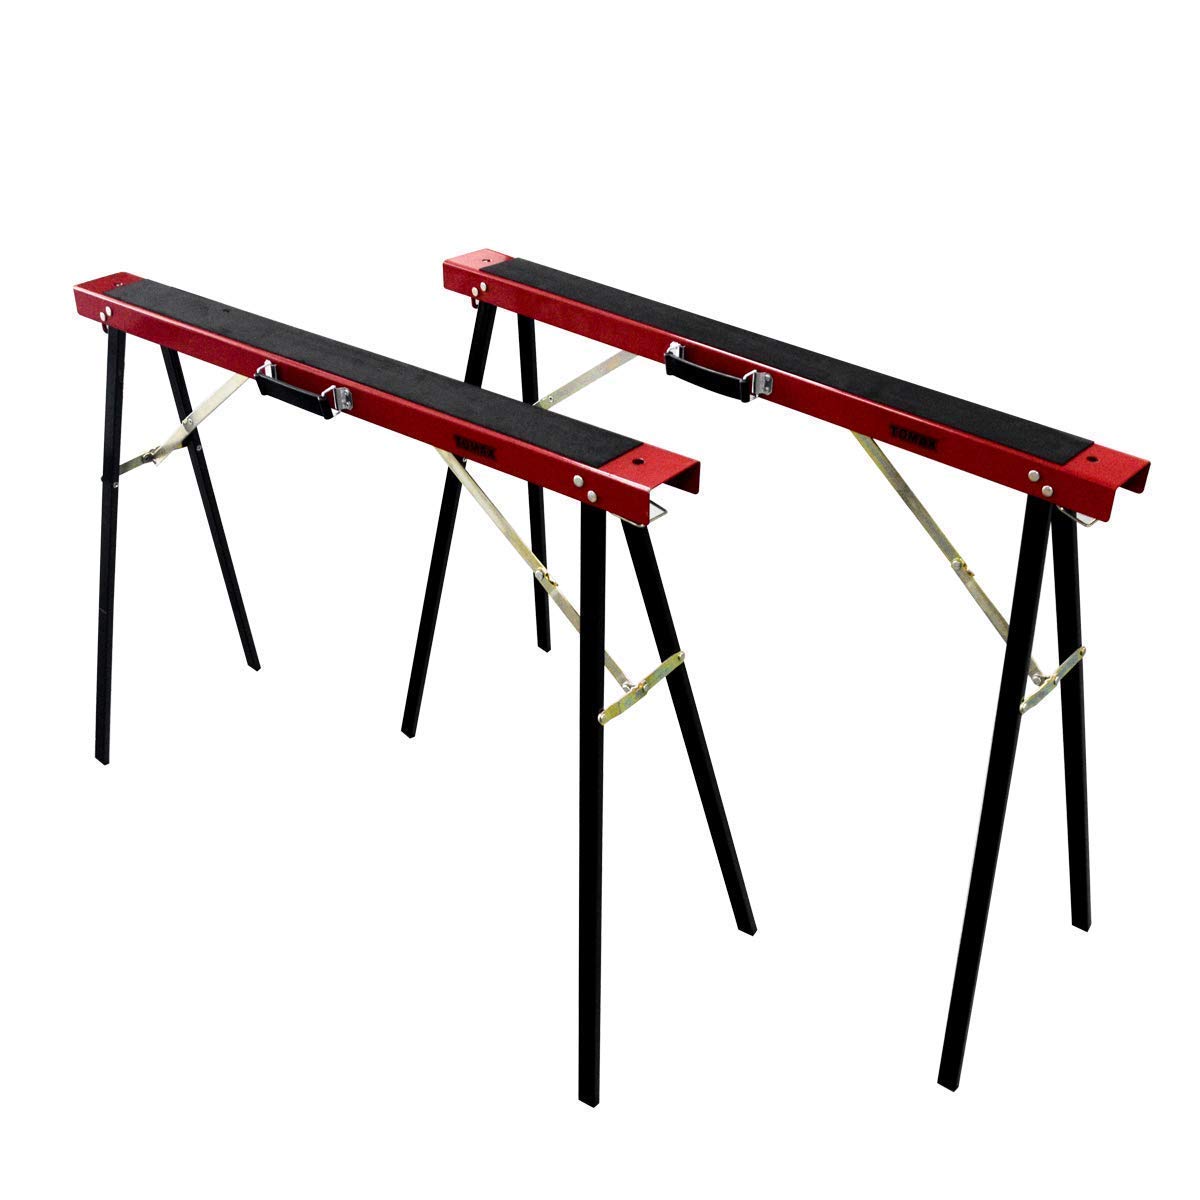 TOMAX Portable Folding Sawhorse Heavy Duty 275lb Weight Capacity Each Twin Pack